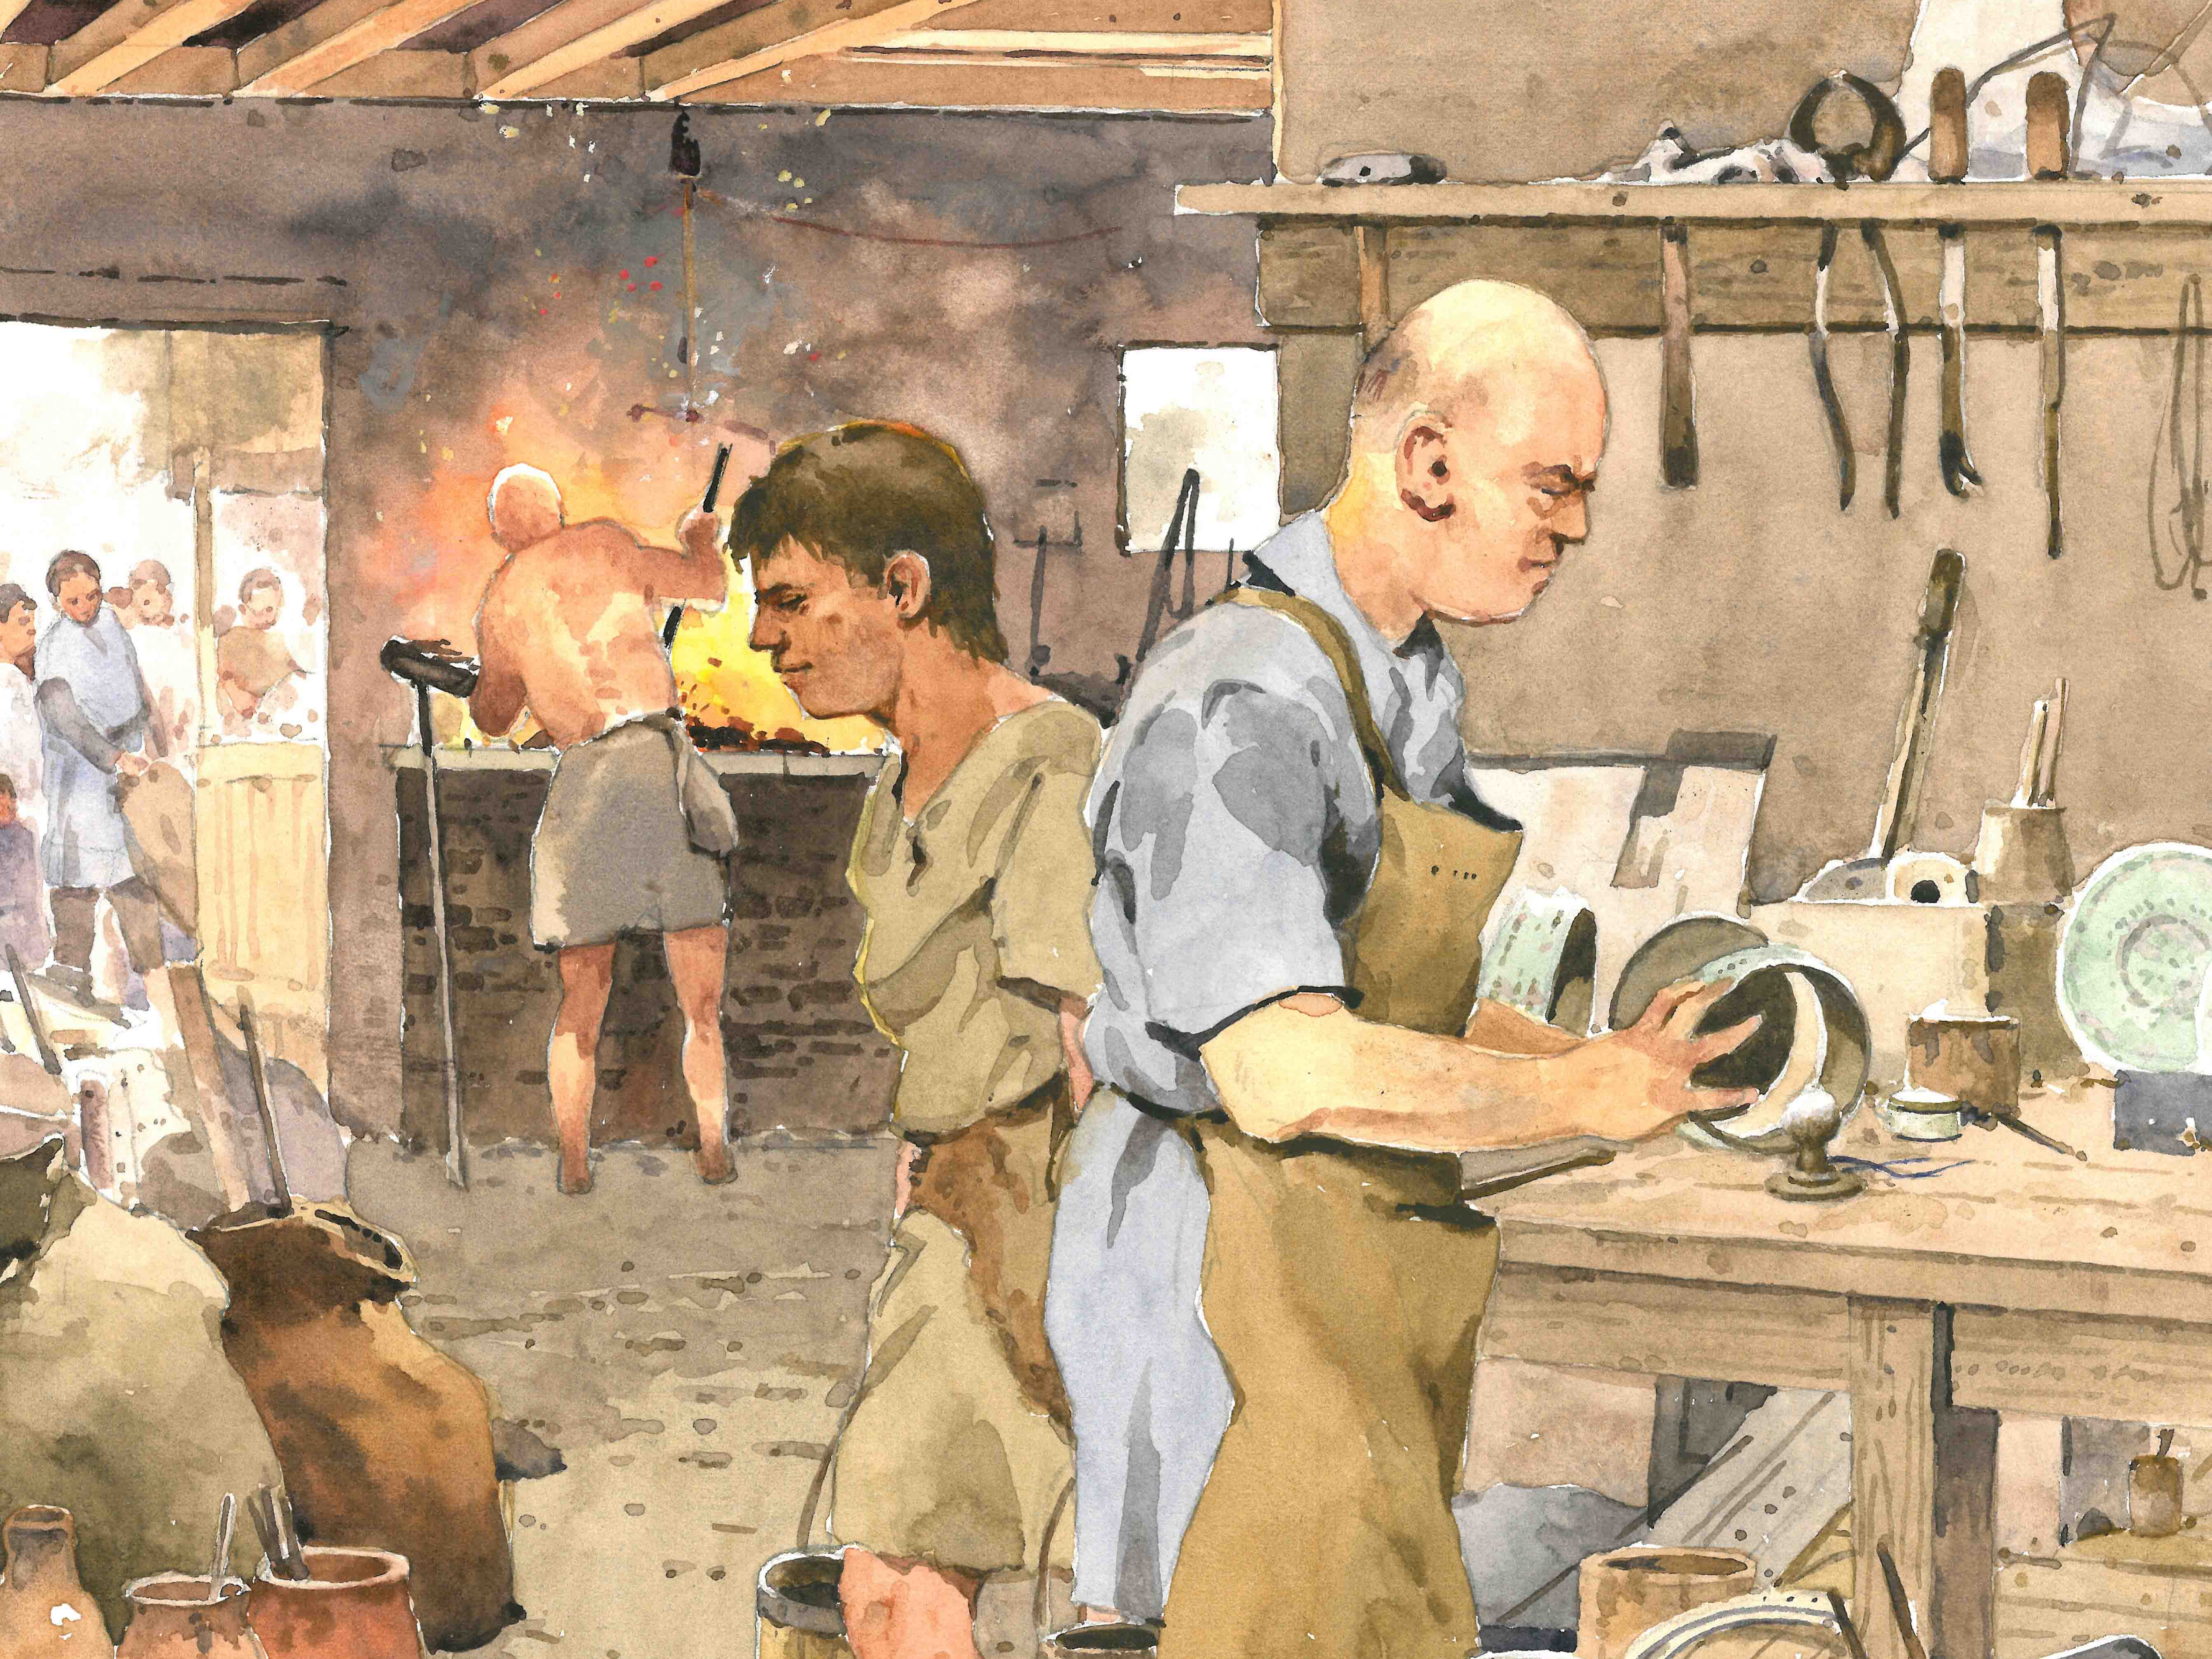 Artist's impression of a busy Roman workshop, filled with fire, smoke and noise